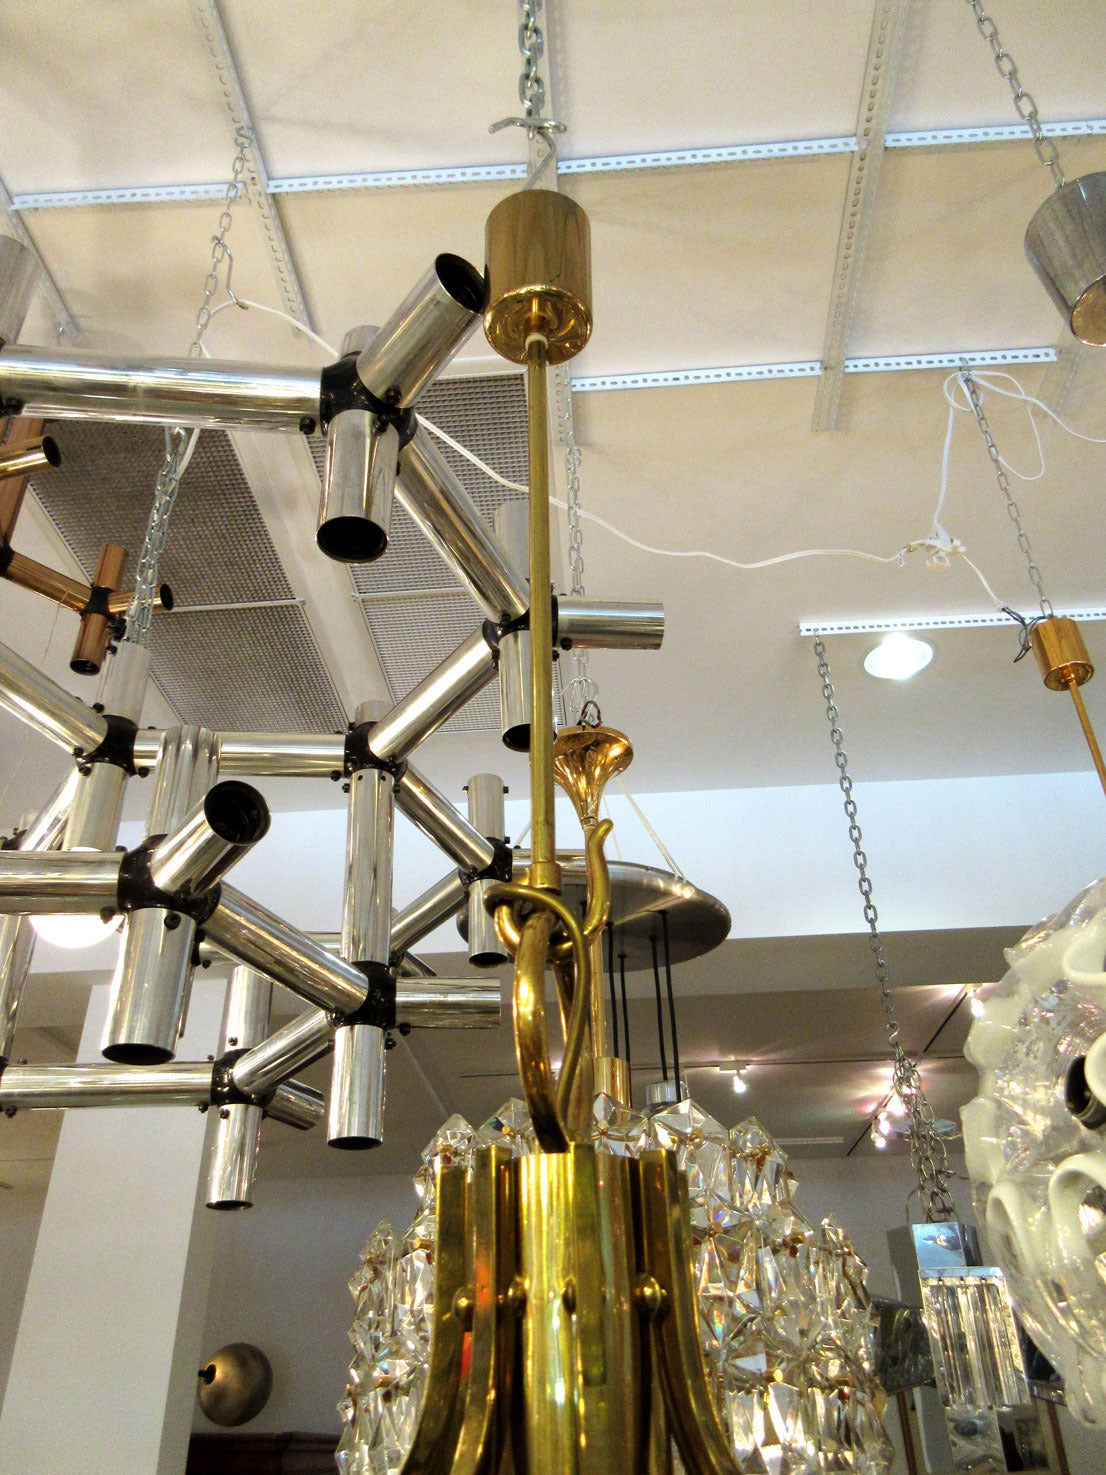 Vintage Kalmar chandelier with brass hardware and thick glass cubes that radiate around the circumference. There are eight sockets in total. Wired for European standards.